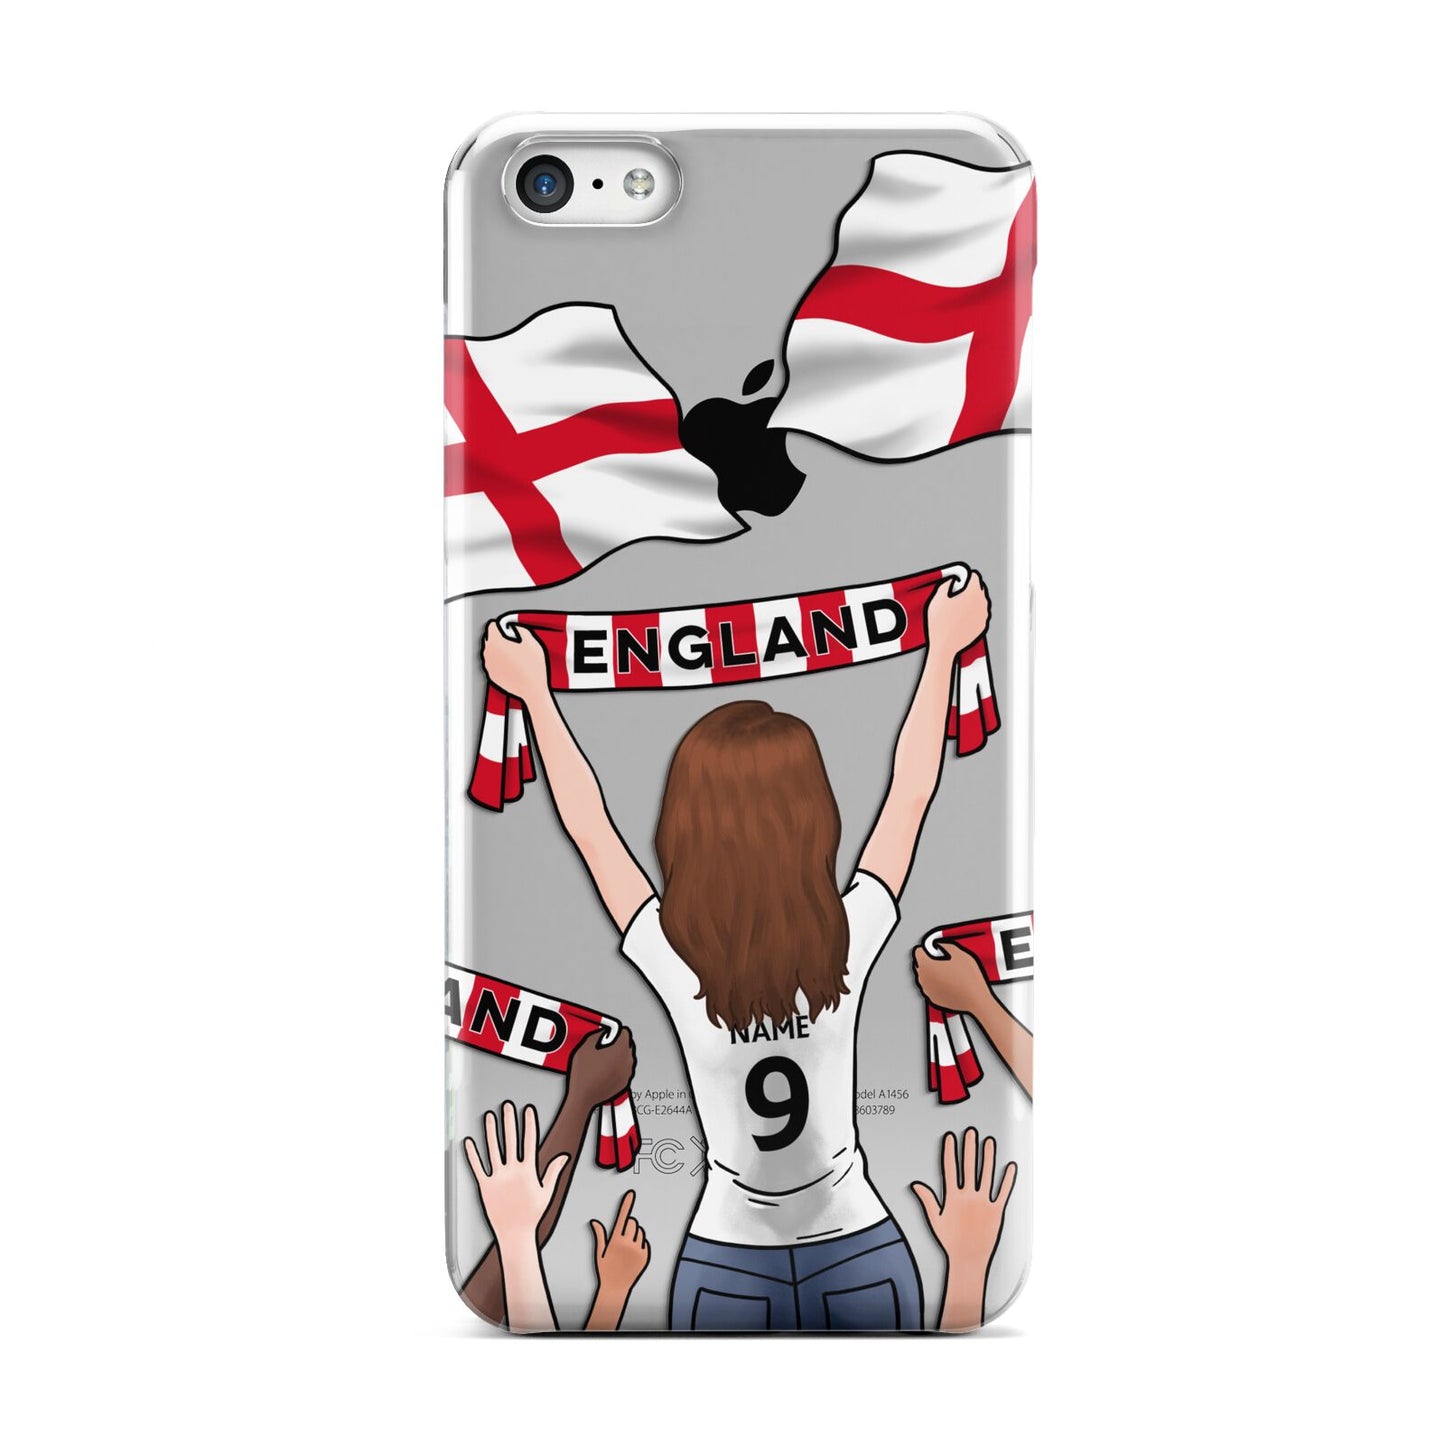 Football Supporter Personalised Apple iPhone 5c Case